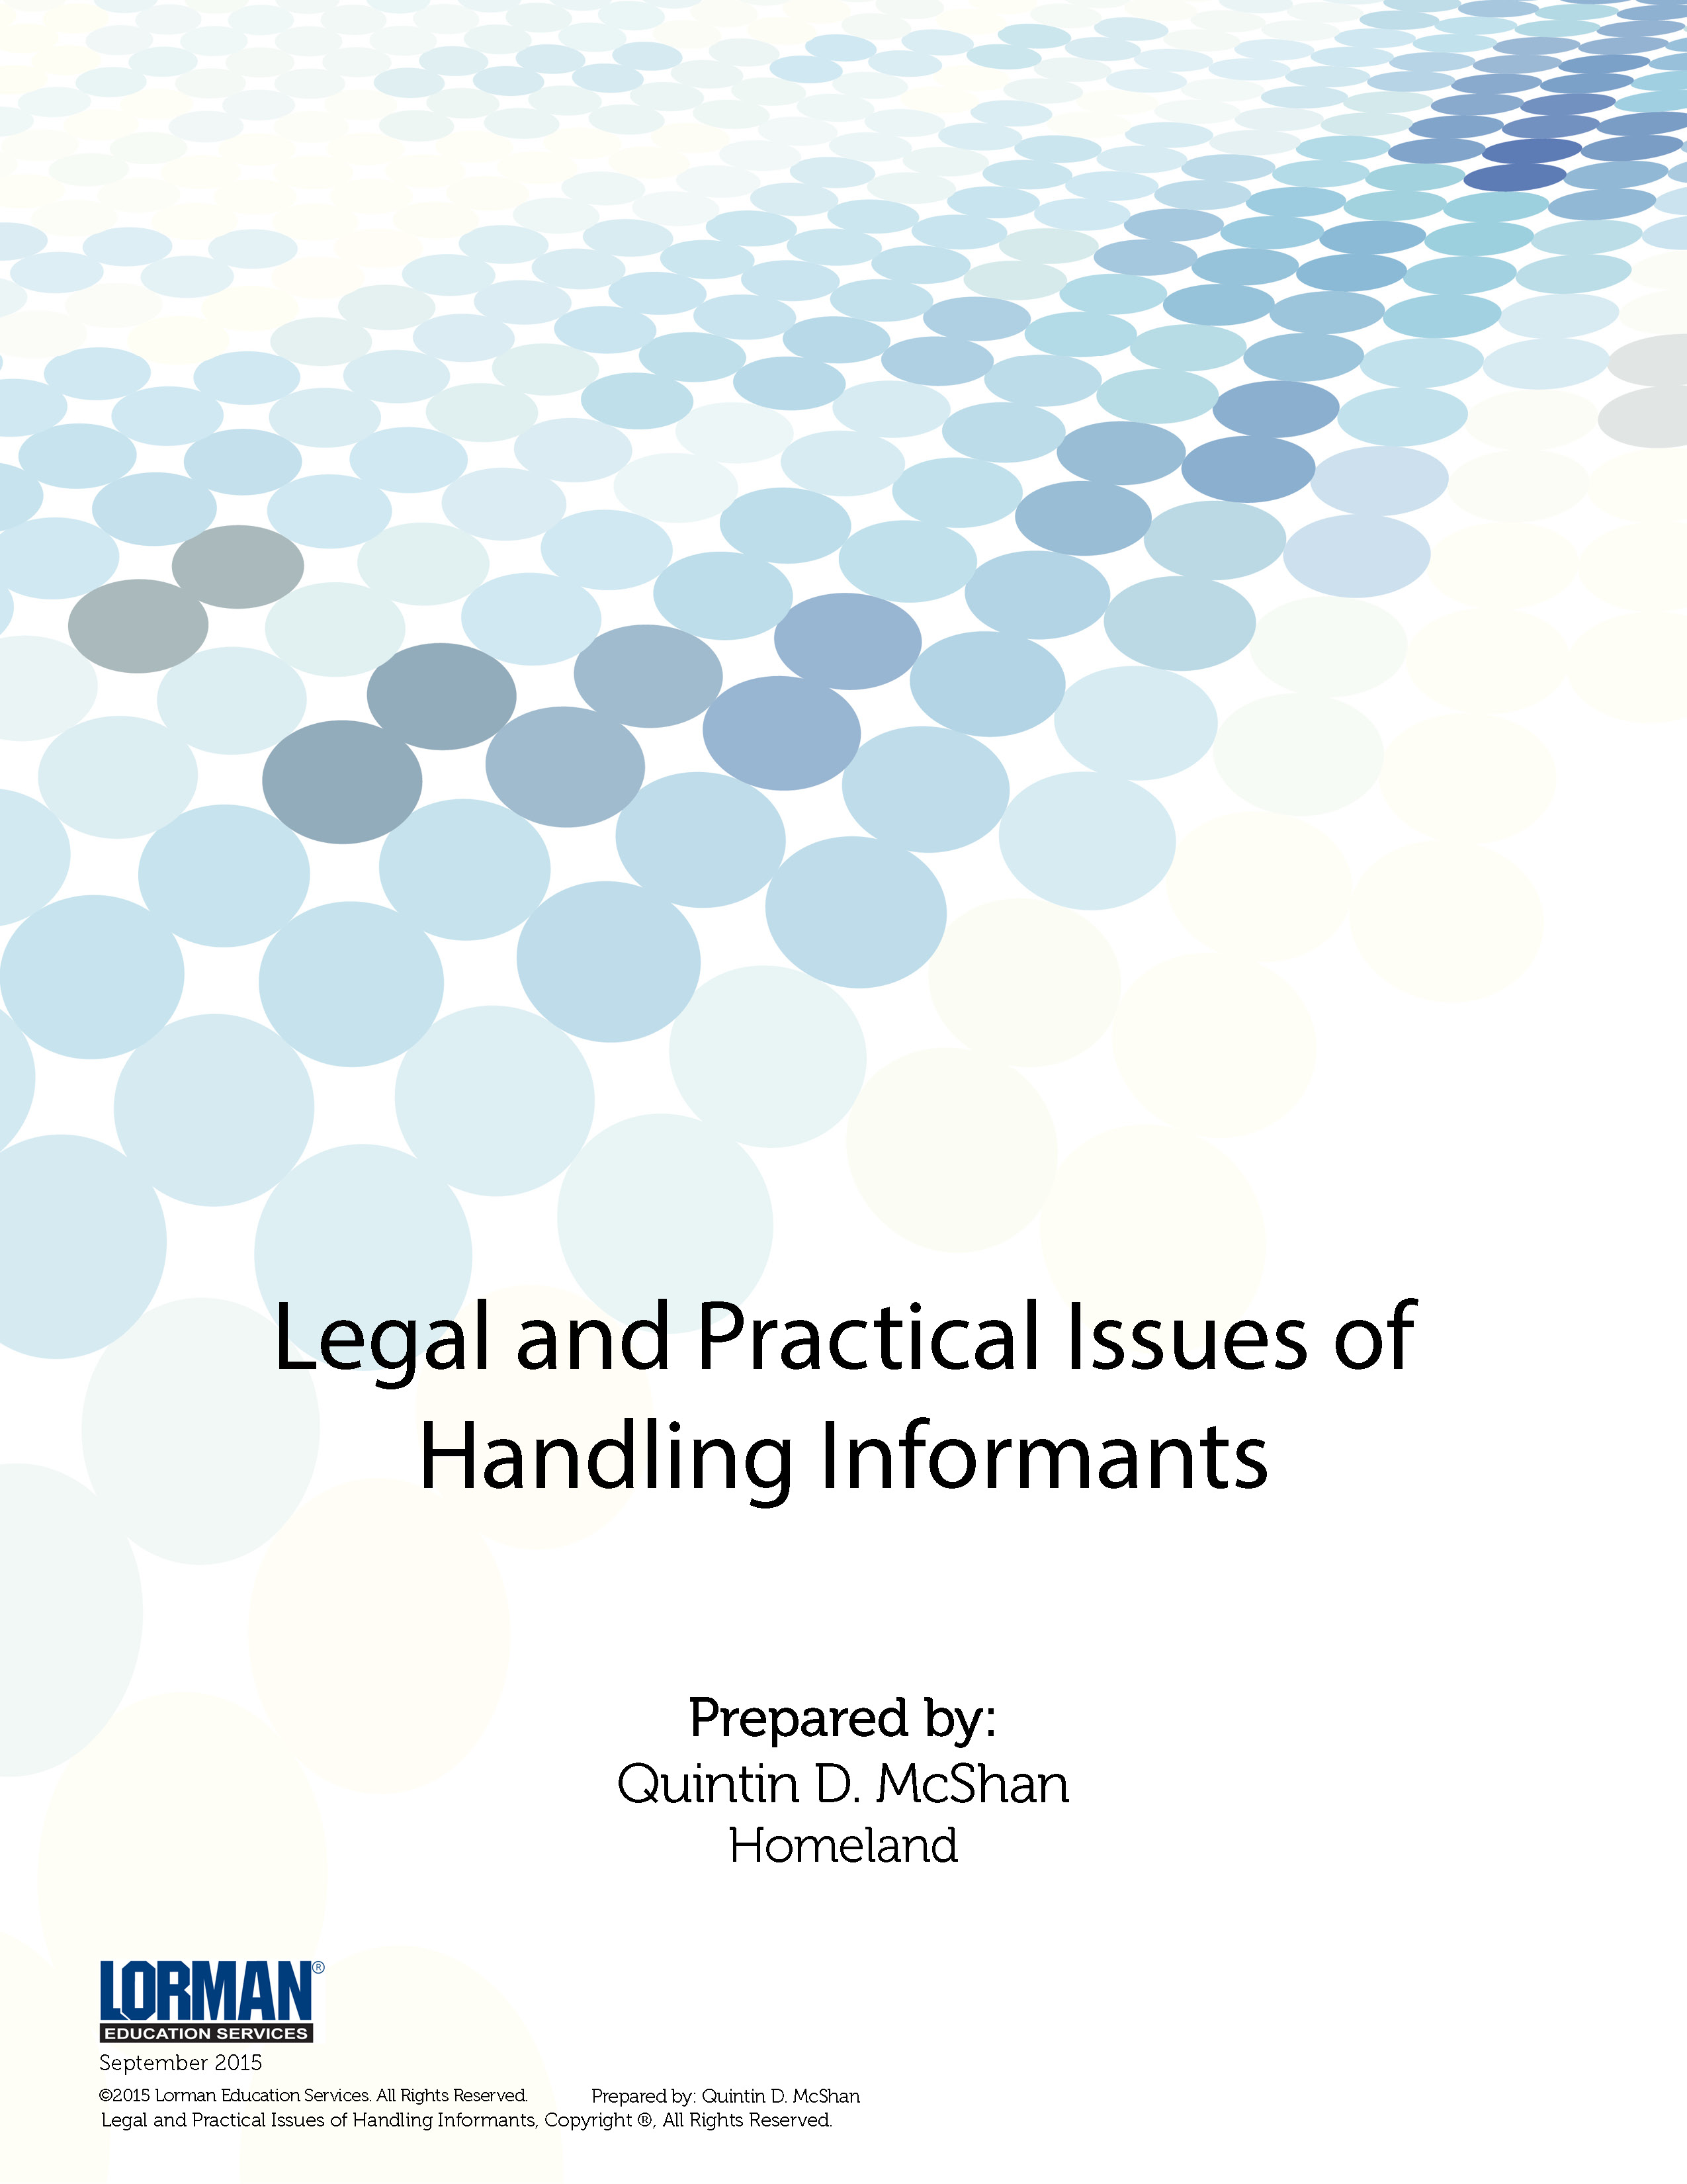 Legal and Practical Issues of Handling Informants